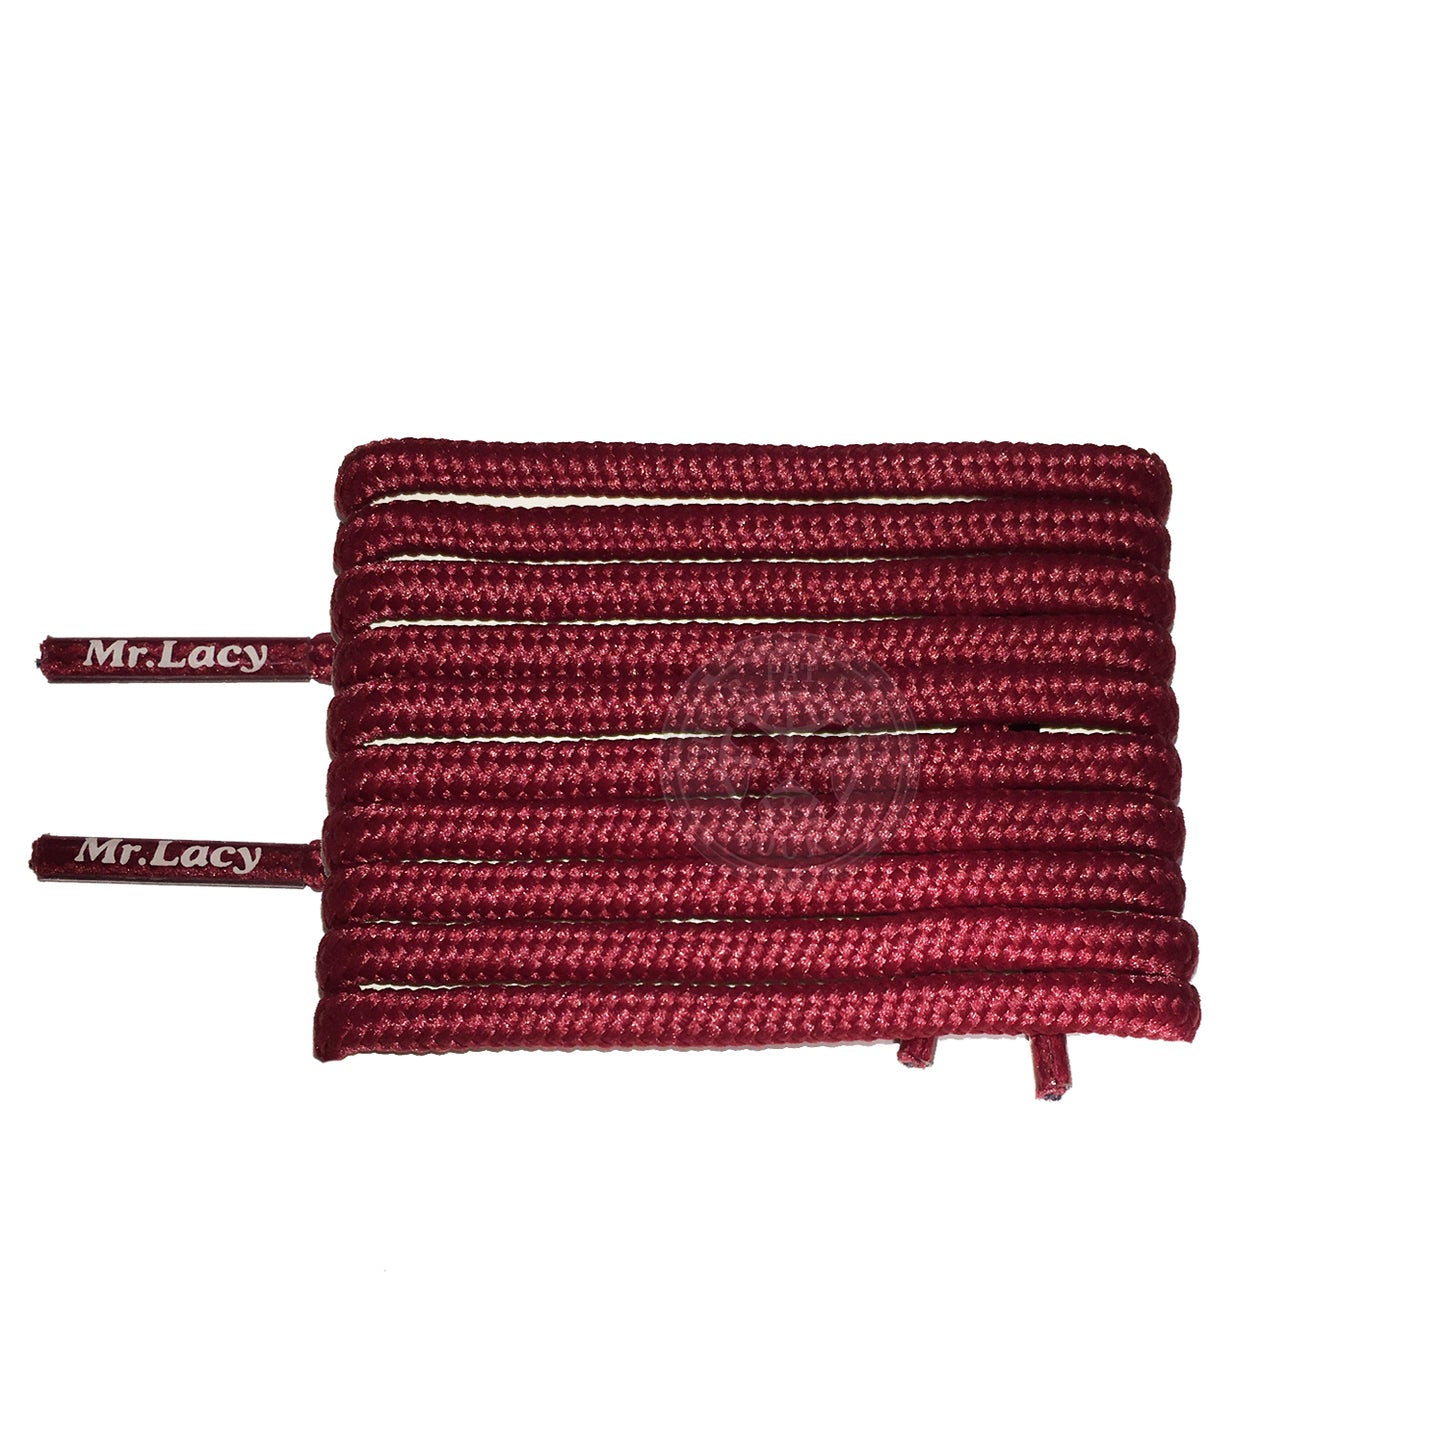 Mr Lacy Runnies Round - Burgundy Shoelaces